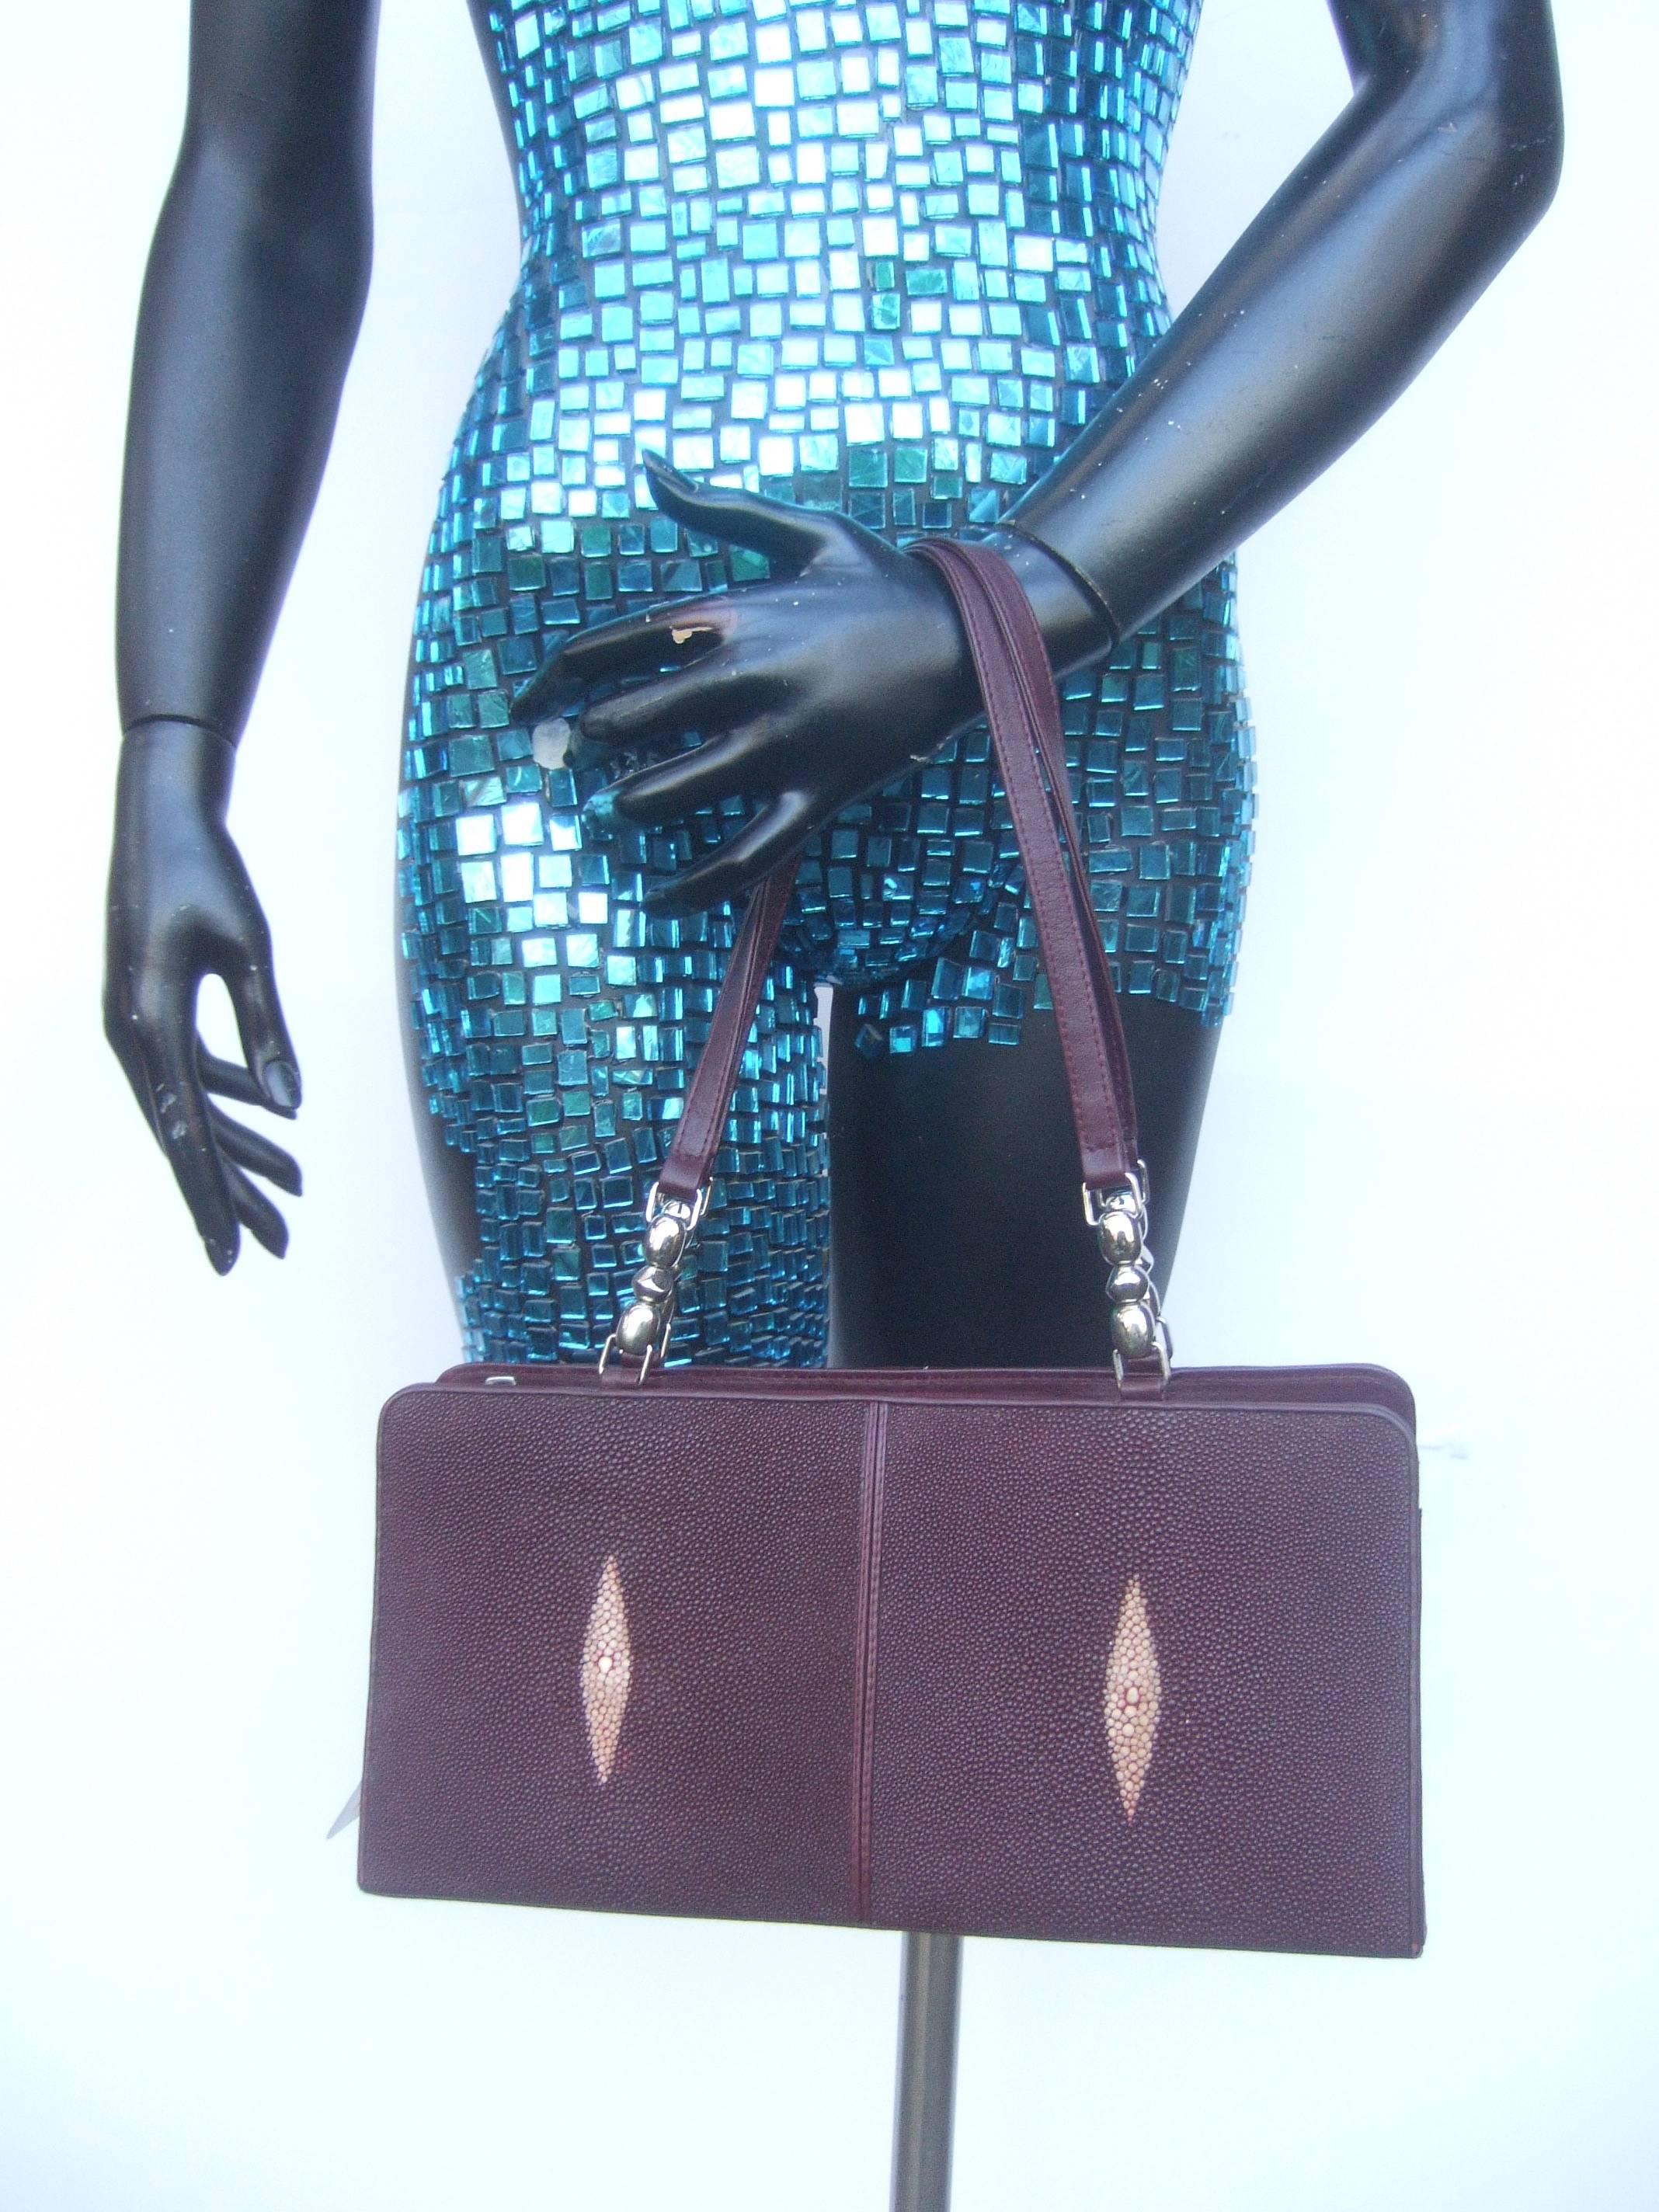 Exotic genuine stringray burgundy handbag 
The unique handbag is covered with stringray 
skin. Carried with twin burgundy leather handles

The handle straps are accented with sleek chrome
metal hardware. The interior is lined in golden